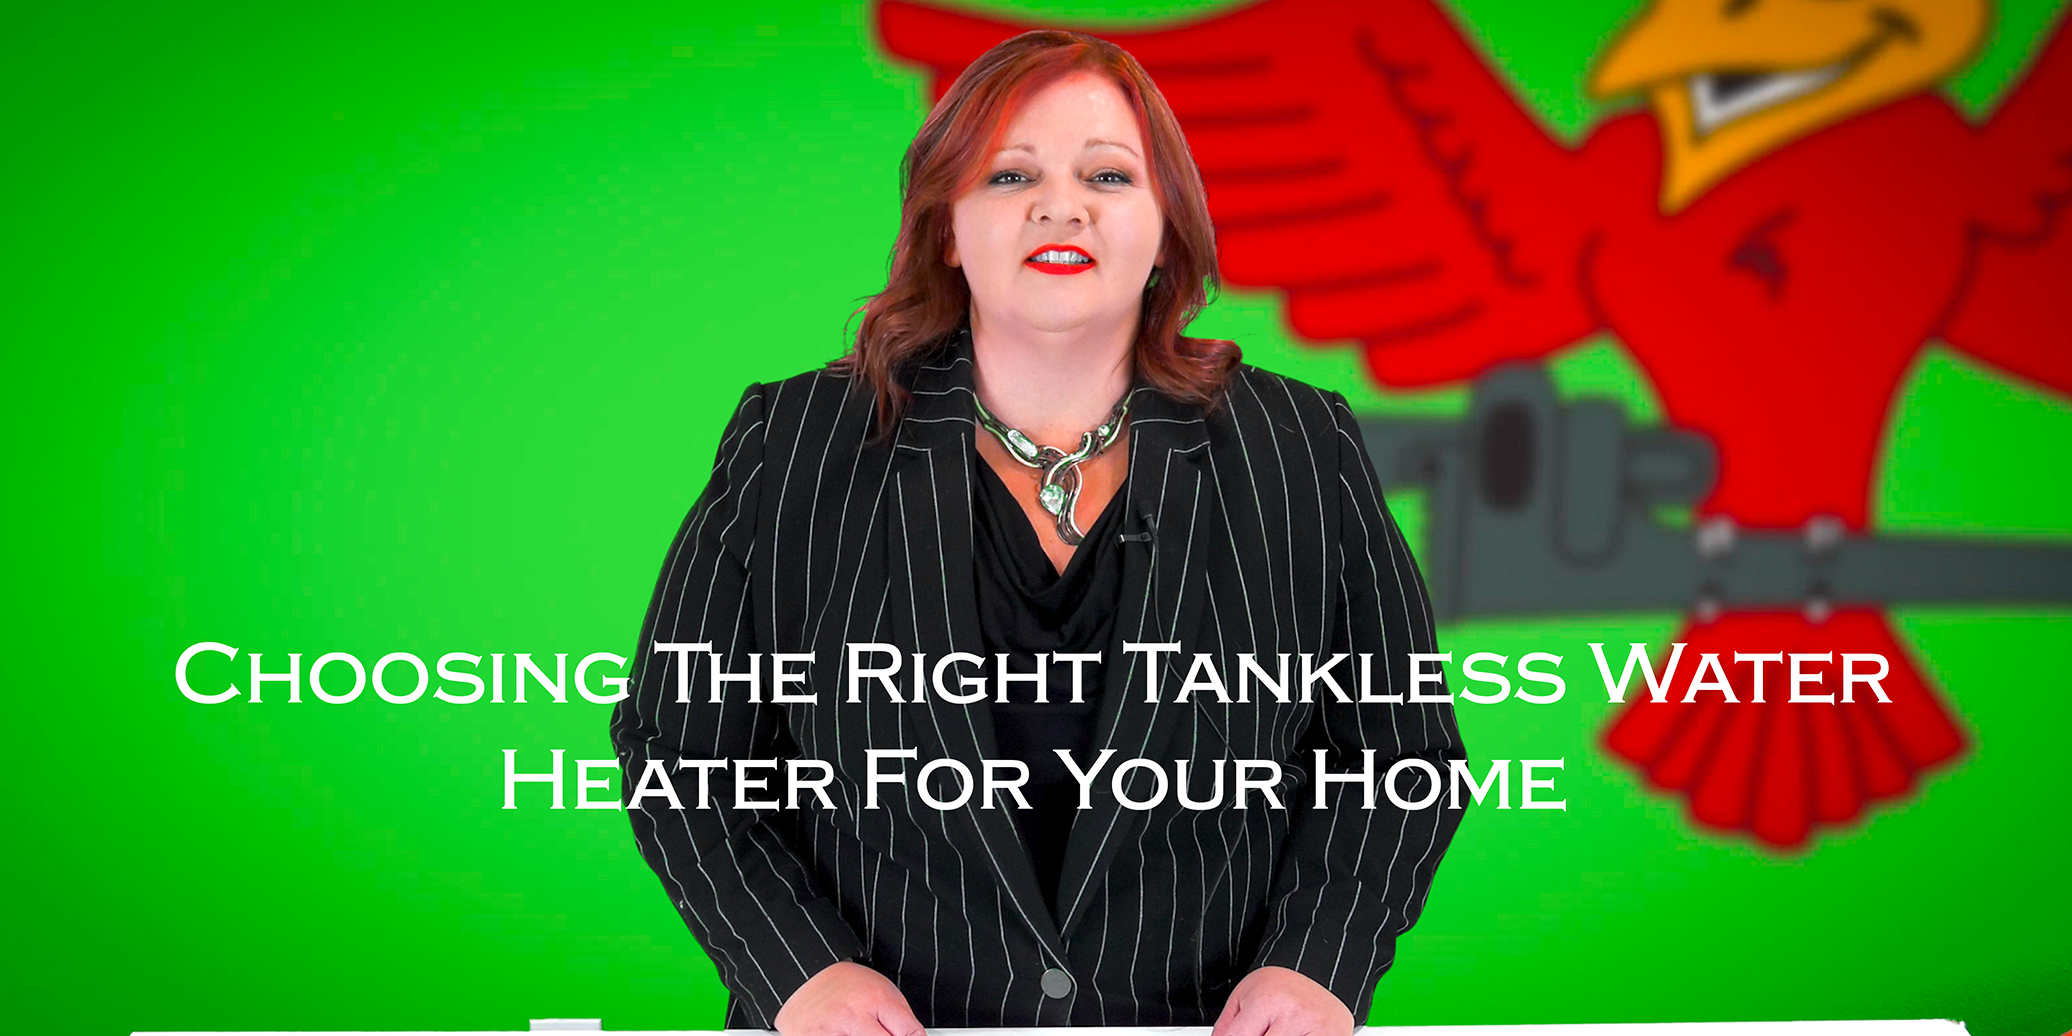 The owner of Robins Plumbing, Stephanie Robins featured blog titled 'Choosing the tankless water heater for your home'